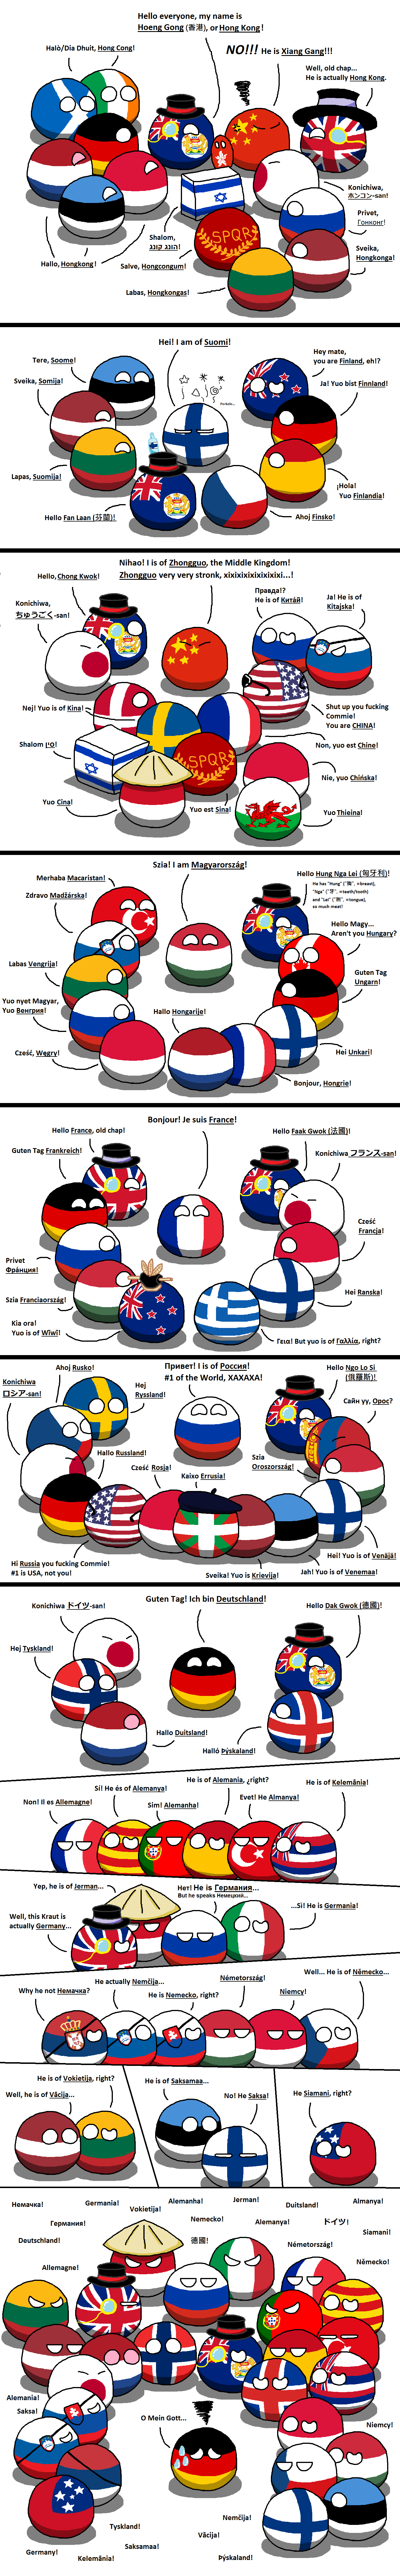 country-balls-how-are-they-called-